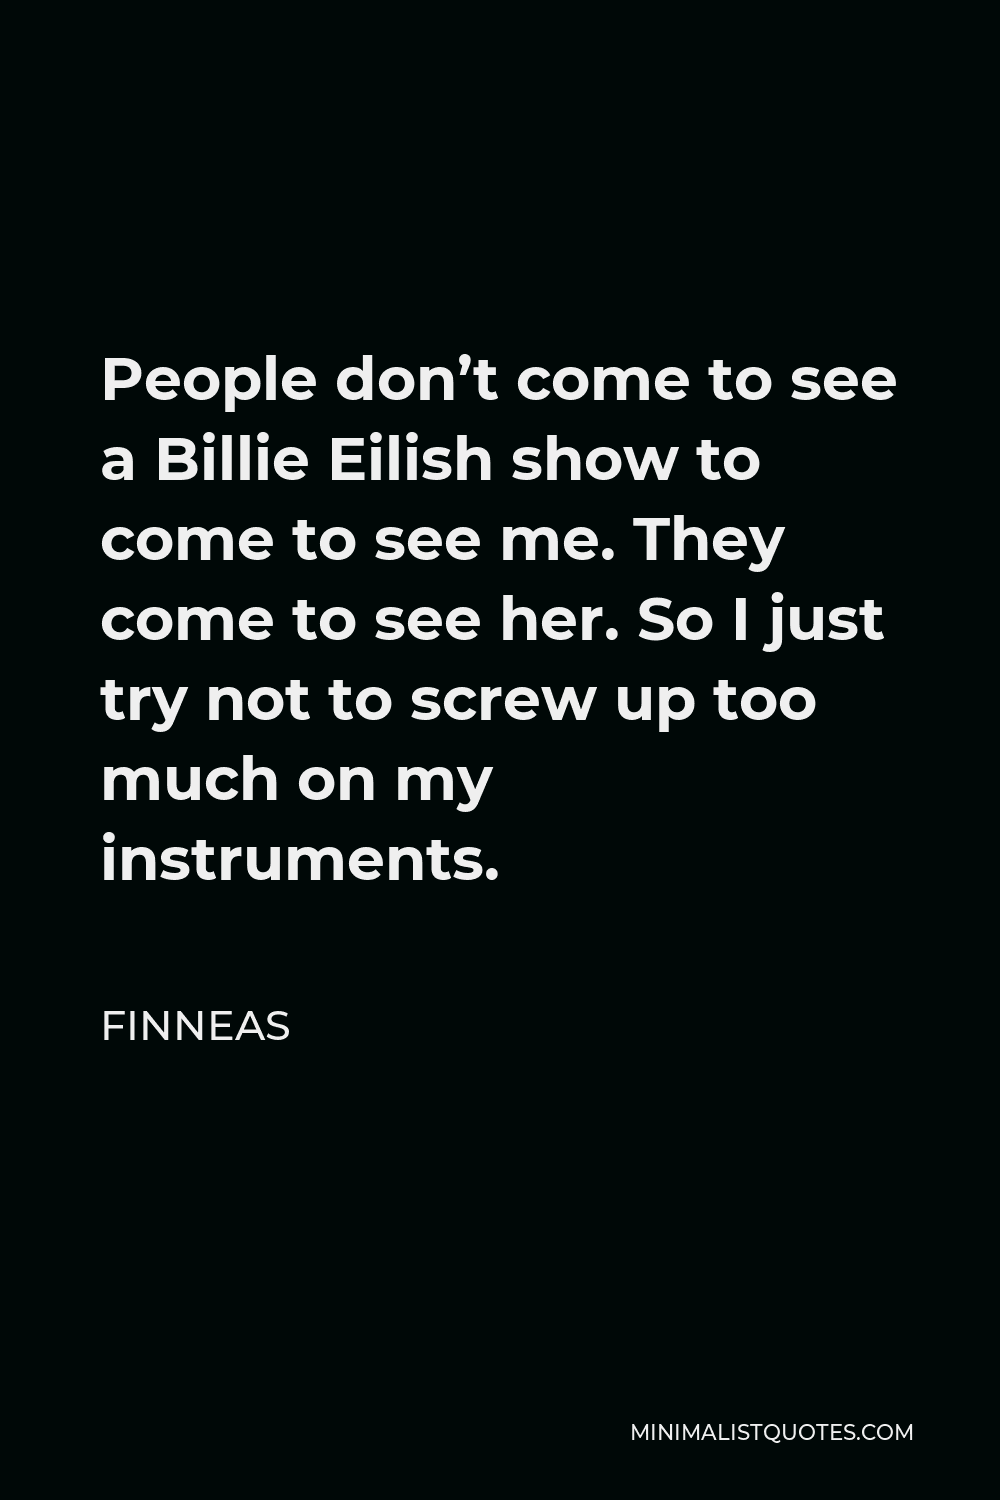 Finneas Quote - People don’t come to see a Billie Eilish show to come to see me. They come to see her. So I just try not to screw up too much on my instruments.